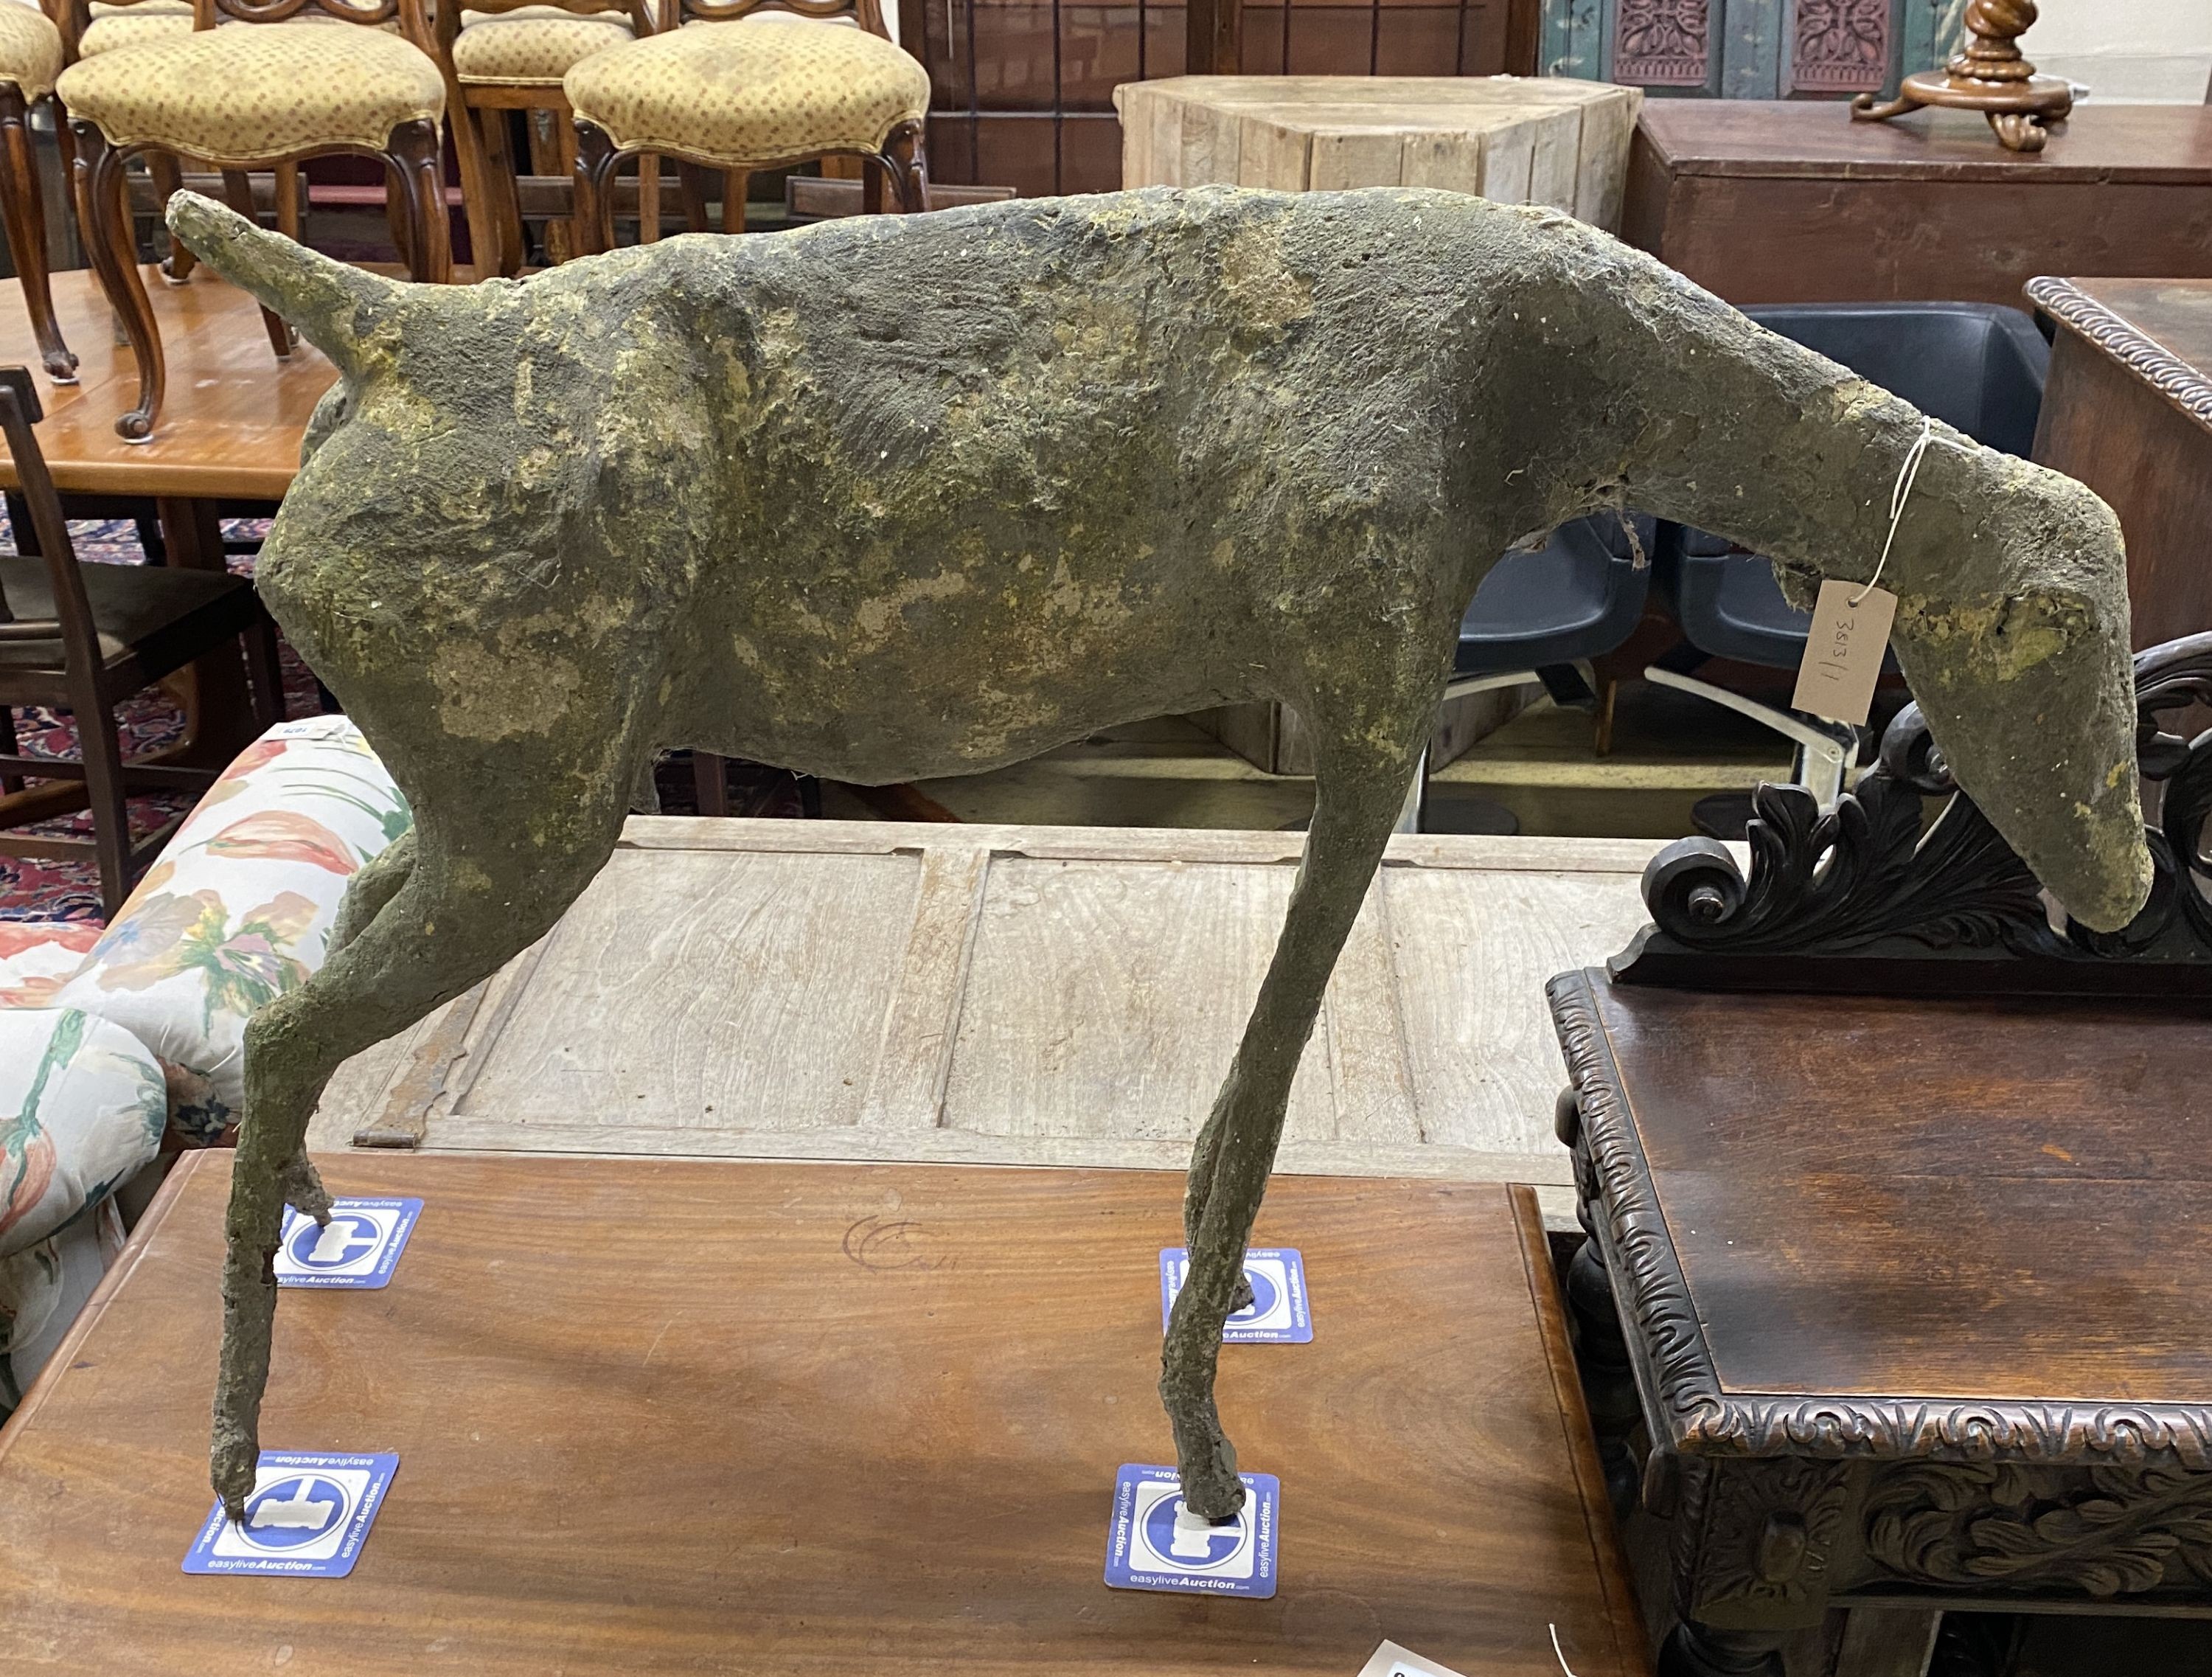 A composition model of a standing dog, width 100cm, height 73cm